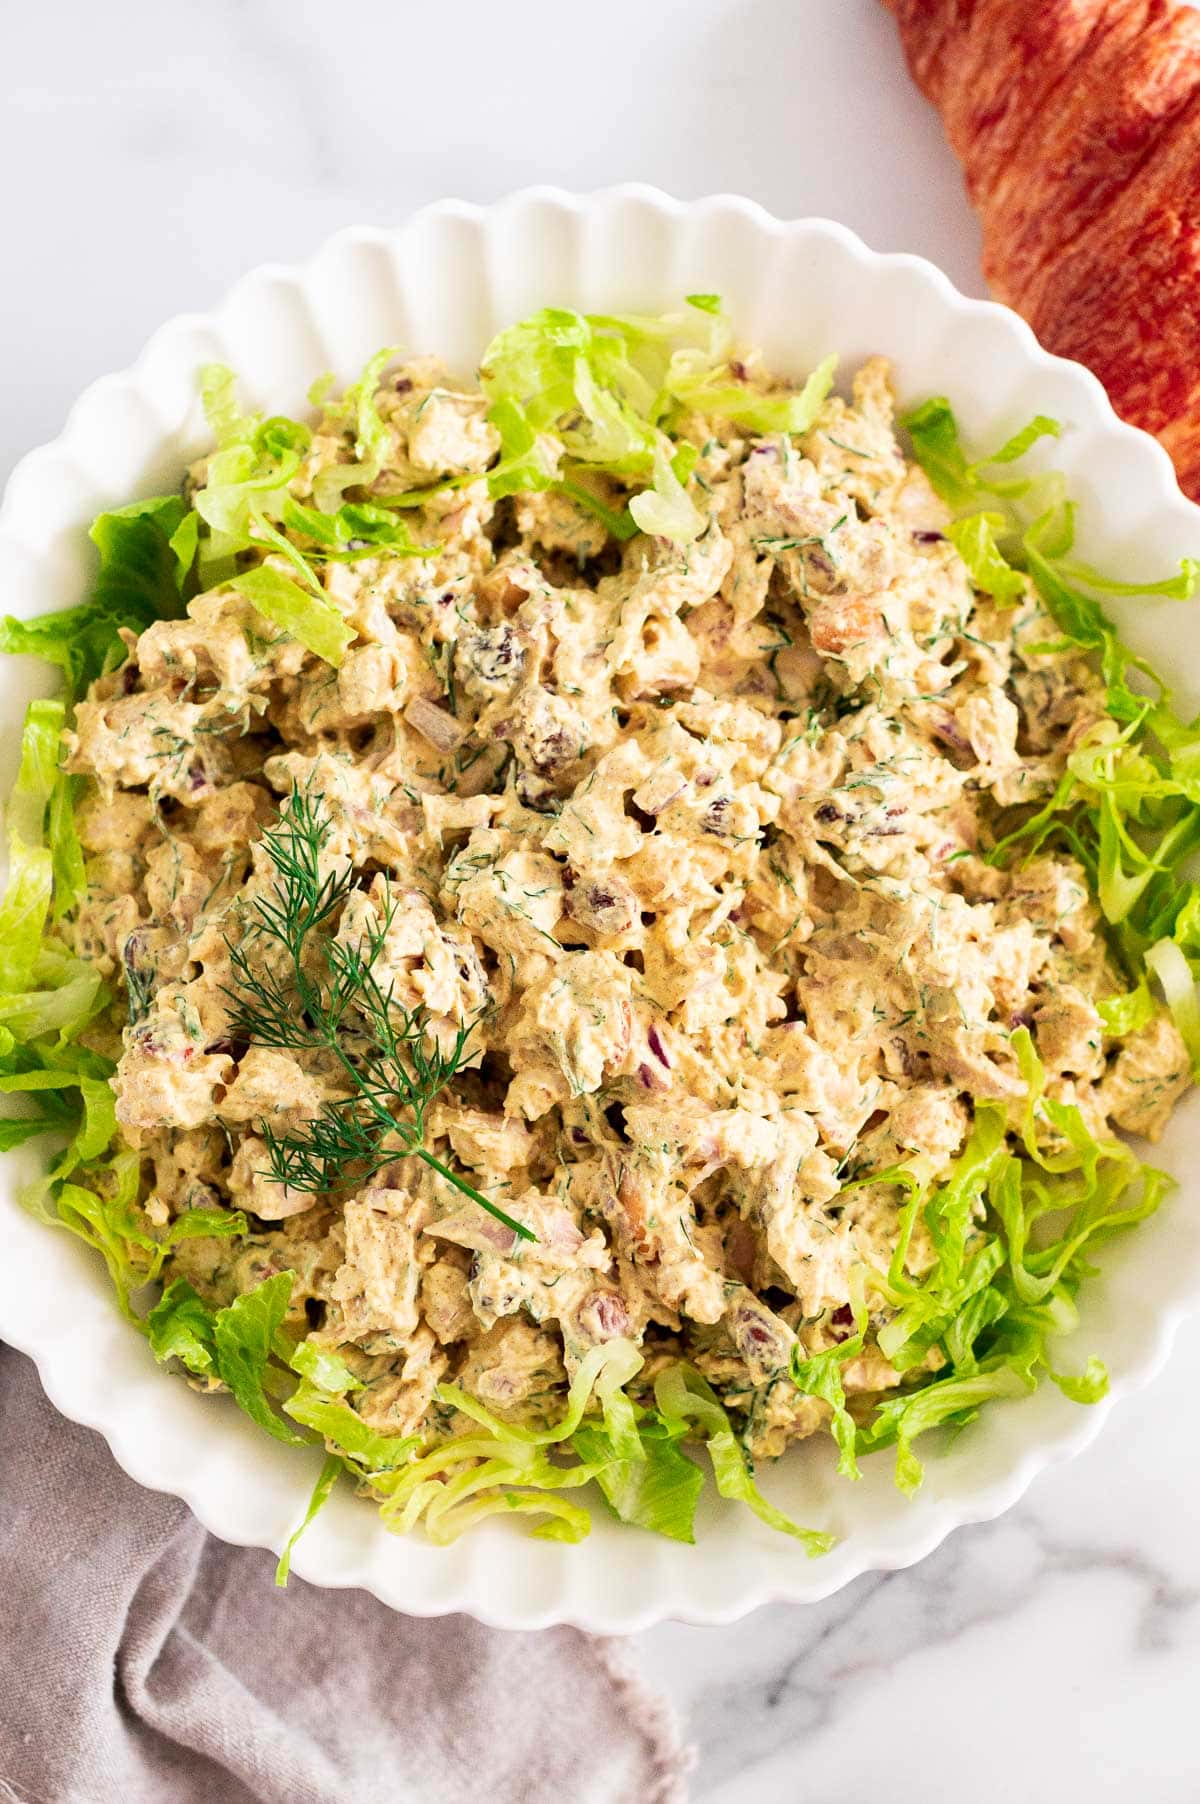 Curry chicken salad served in a bowl with lettuce and garnished with dill.